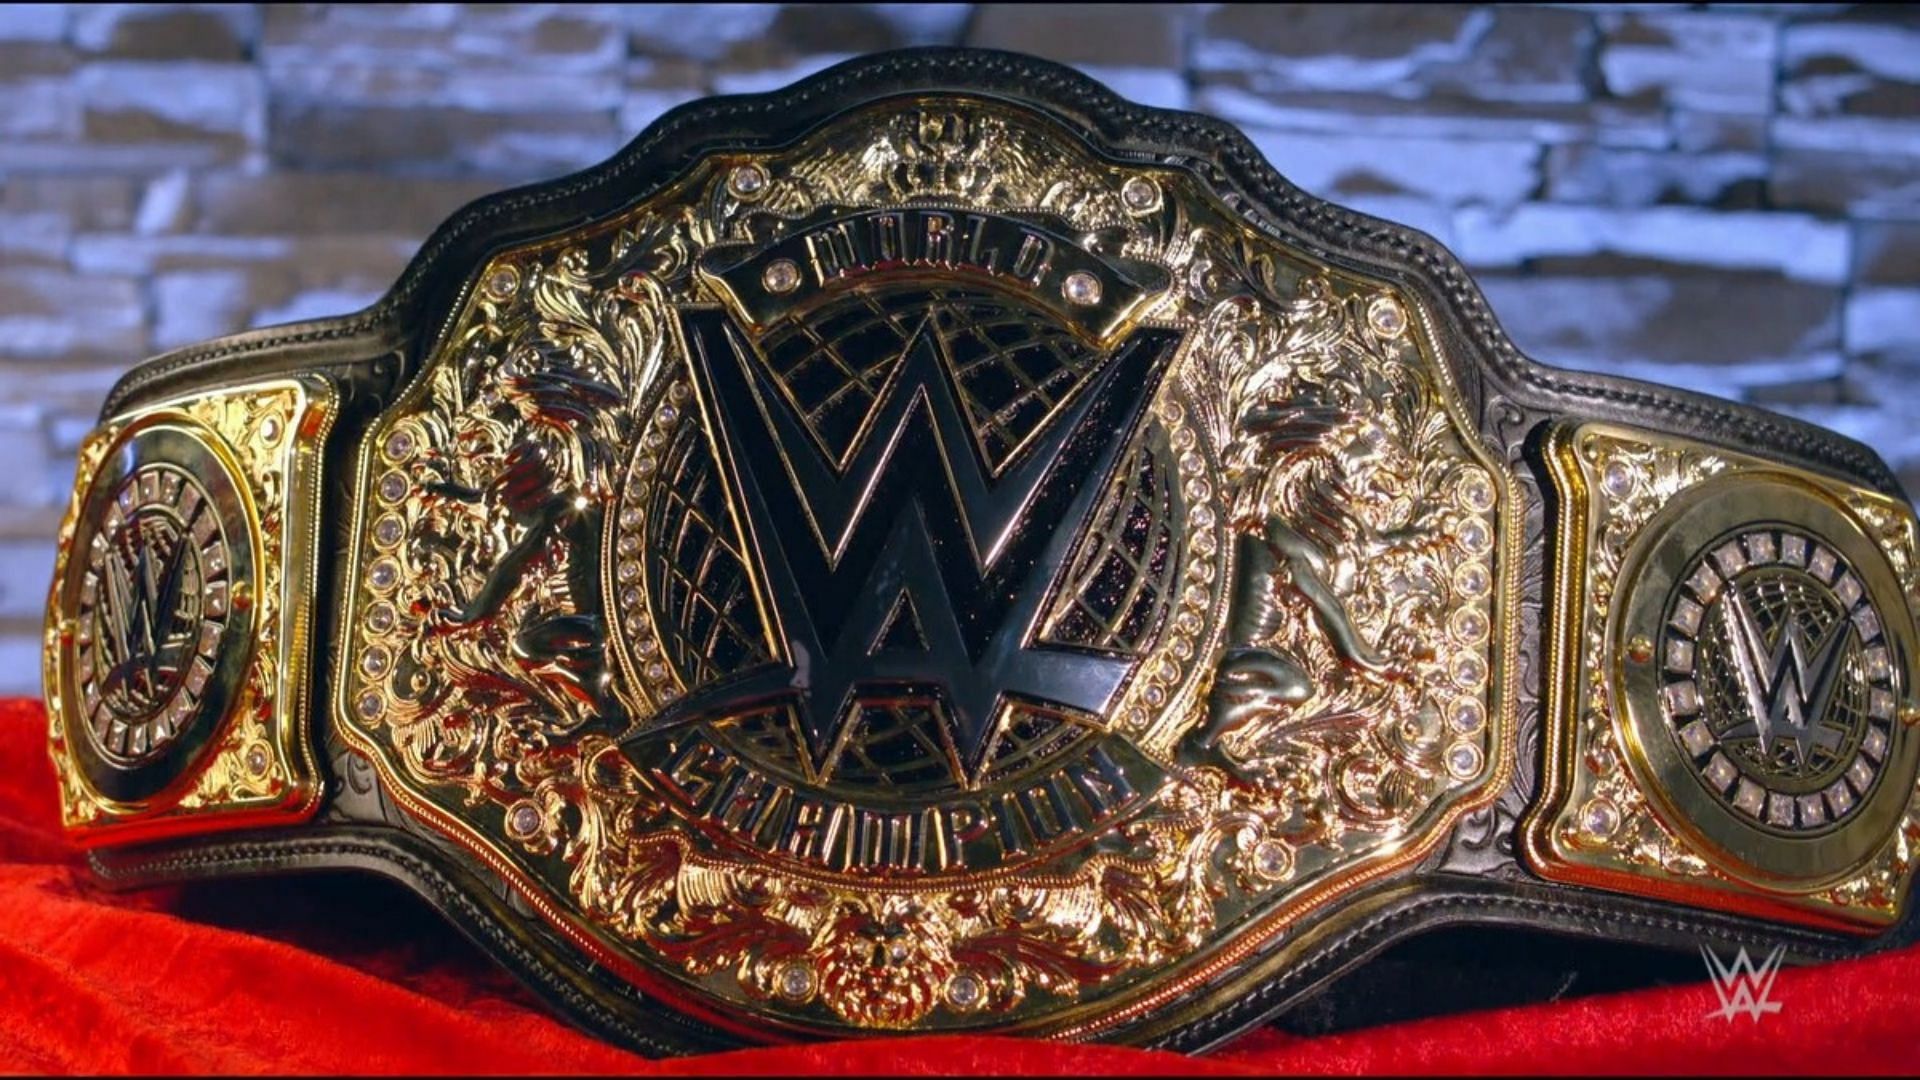 The WWE World Heavyweight Champion is one of the most iconic titles of the promotion